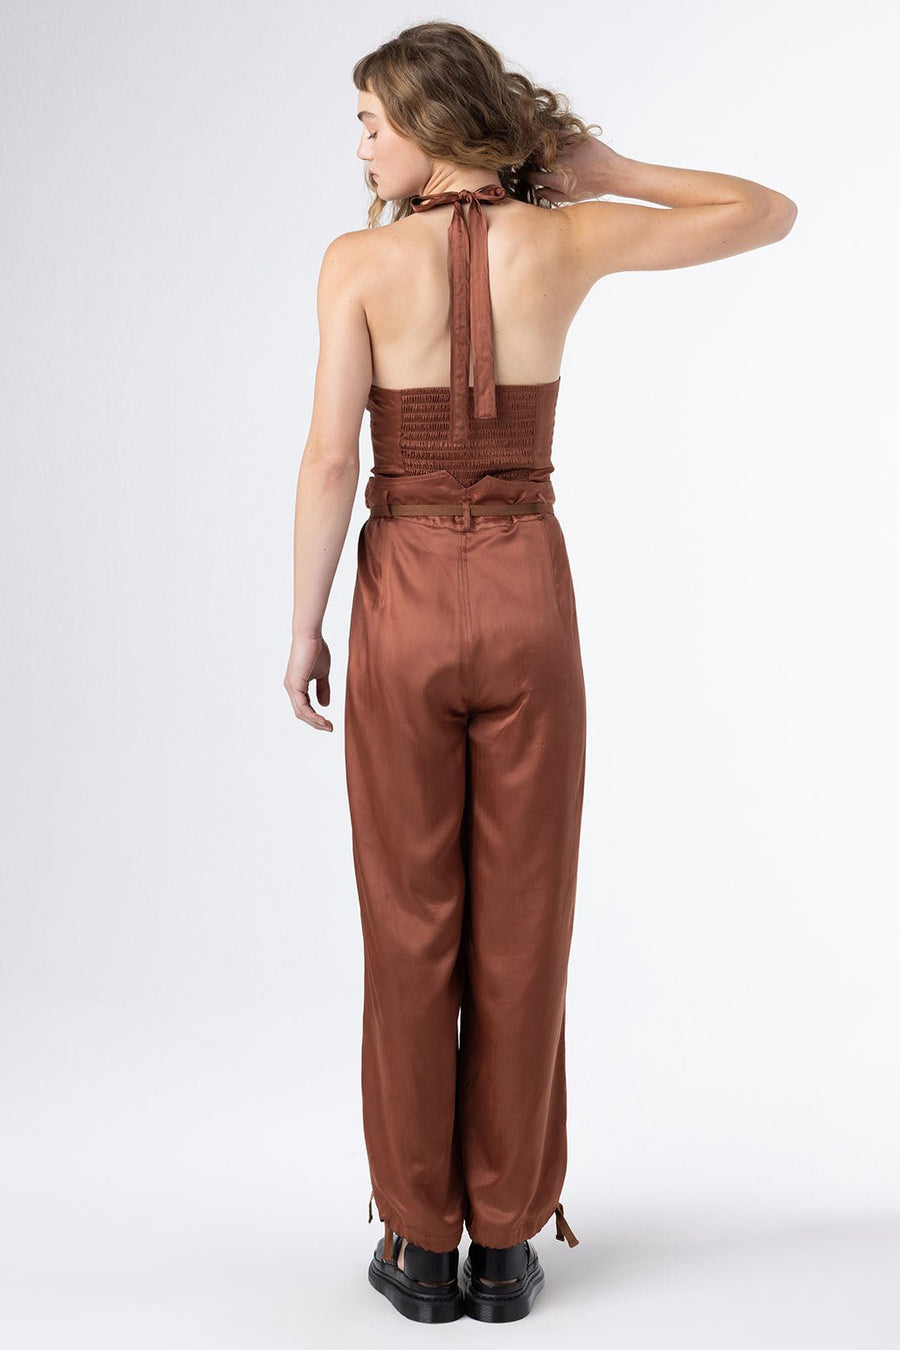 VALENTINE CINCHED PANTS, RUST - Burning Torch Online Boutique